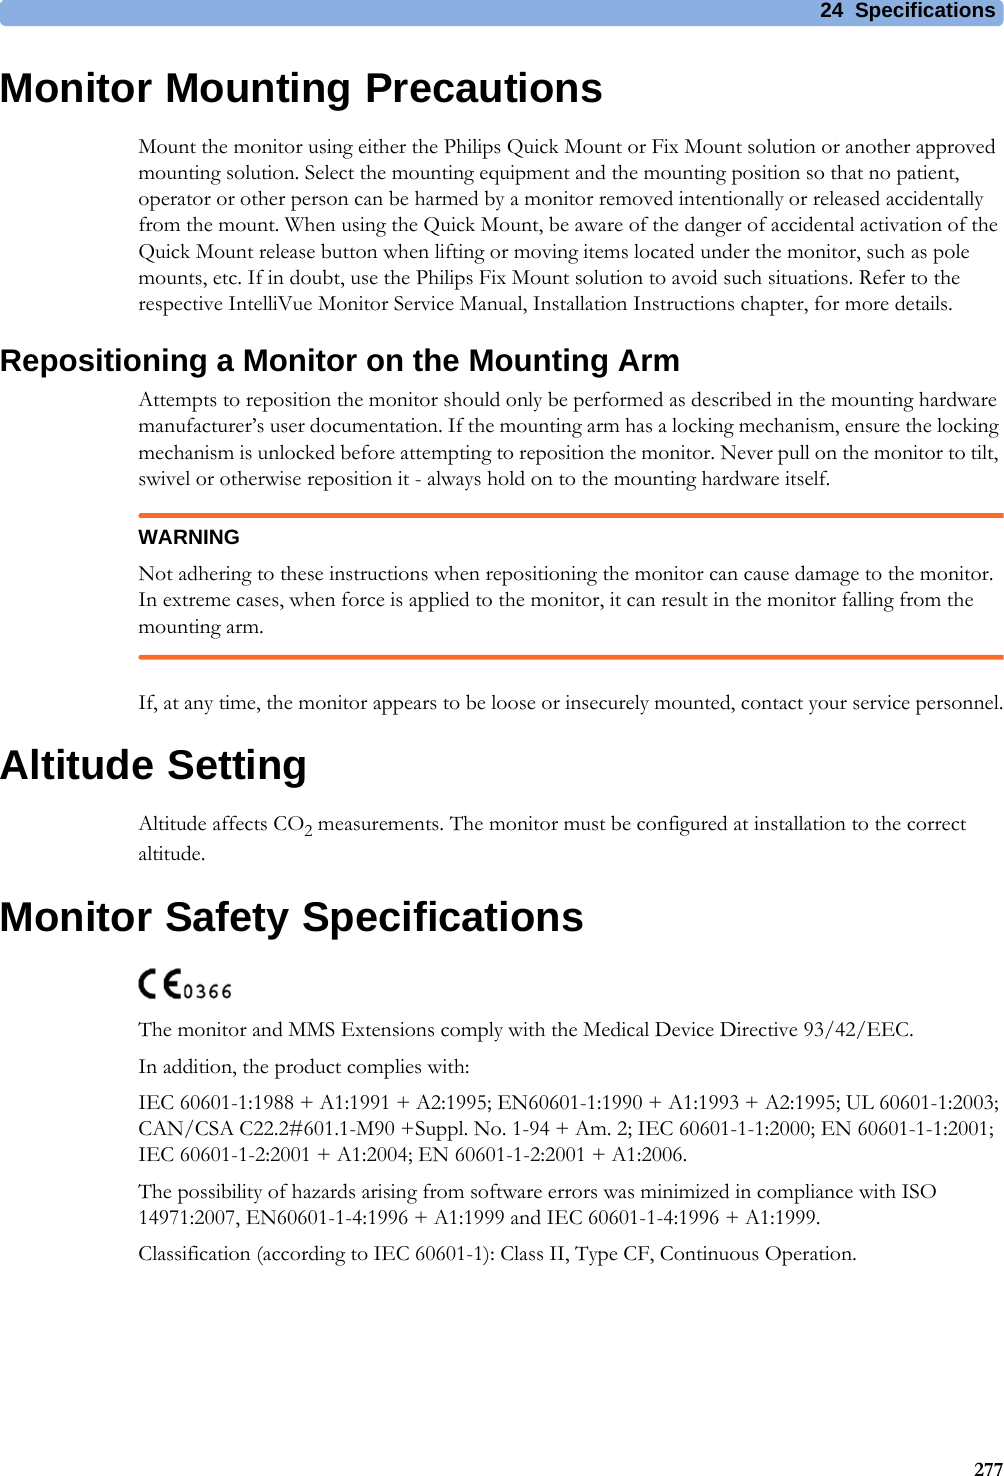 24 Specifications277Monitor Mounting PrecautionsMount the monitor using either the Philips Quick Mount or Fix Mount solution or another approved mounting solution. Select the mounting equipment and the mounting position so that no patient, operator or other person can be harmed by a monitor removed intentionally or released accidentally from the mount. When using the Quick Mount, be aware of the danger of accidental activation of the Quick Mount release button when lifting or moving items located under the monitor, such as pole mounts, etc. If in doubt, use the Philips Fix Mount solution to avoid such situations. Refer to the respective IntelliVue Monitor Service Manual, Installation Instructions chapter, for more details.Repositioning a Monitor on the Mounting ArmAttempts to reposition the monitor should only be performed as described in the mounting hardware manufacturer’s user documentation. If the mounting arm has a locking mechanism, ensure the locking mechanism is unlocked before attempting to reposition the monitor. Never pull on the monitor to tilt, swivel or otherwise reposition it - always hold on to the mounting hardware itself.WARNINGNot adhering to these instructions when repositioning the monitor can cause damage to the monitor. In extreme cases, when force is applied to the monitor, it can result in the monitor falling from the mounting arm.If, at any time, the monitor appears to be loose or insecurely mounted, contact your service personnel.Altitude SettingAltitude affects CO2 measurements. The monitor must be configured at installation to the correct altitude. Monitor Safety SpecificationsThe monitor and MMS Extensions comply with the Medical Device Directive 93/42/EEC.In addition, the product complies with:IEC 60601-1:1988 + A1:1991 + A2:1995; EN60601-1:1990 + A1:1993 + A2:1995; UL 60601-1:2003; CAN/CSA C22.2#601.1-M90 +Suppl. No. 1-94 + Am. 2; IEC 60601-1-1:2000; EN 60601-1-1:2001; IEC 60601-1-2:2001 + A1:2004; EN 60601-1-2:2001 + A1:2006.The possibility of hazards arising from software errors was minimized in compliance with ISO 14971:2007, EN60601-1-4:1996 + A1:1999 and IEC 60601-1-4:1996 + A1:1999.Classification (according to IEC 60601-1): Class II, Type CF, Continuous Operation.